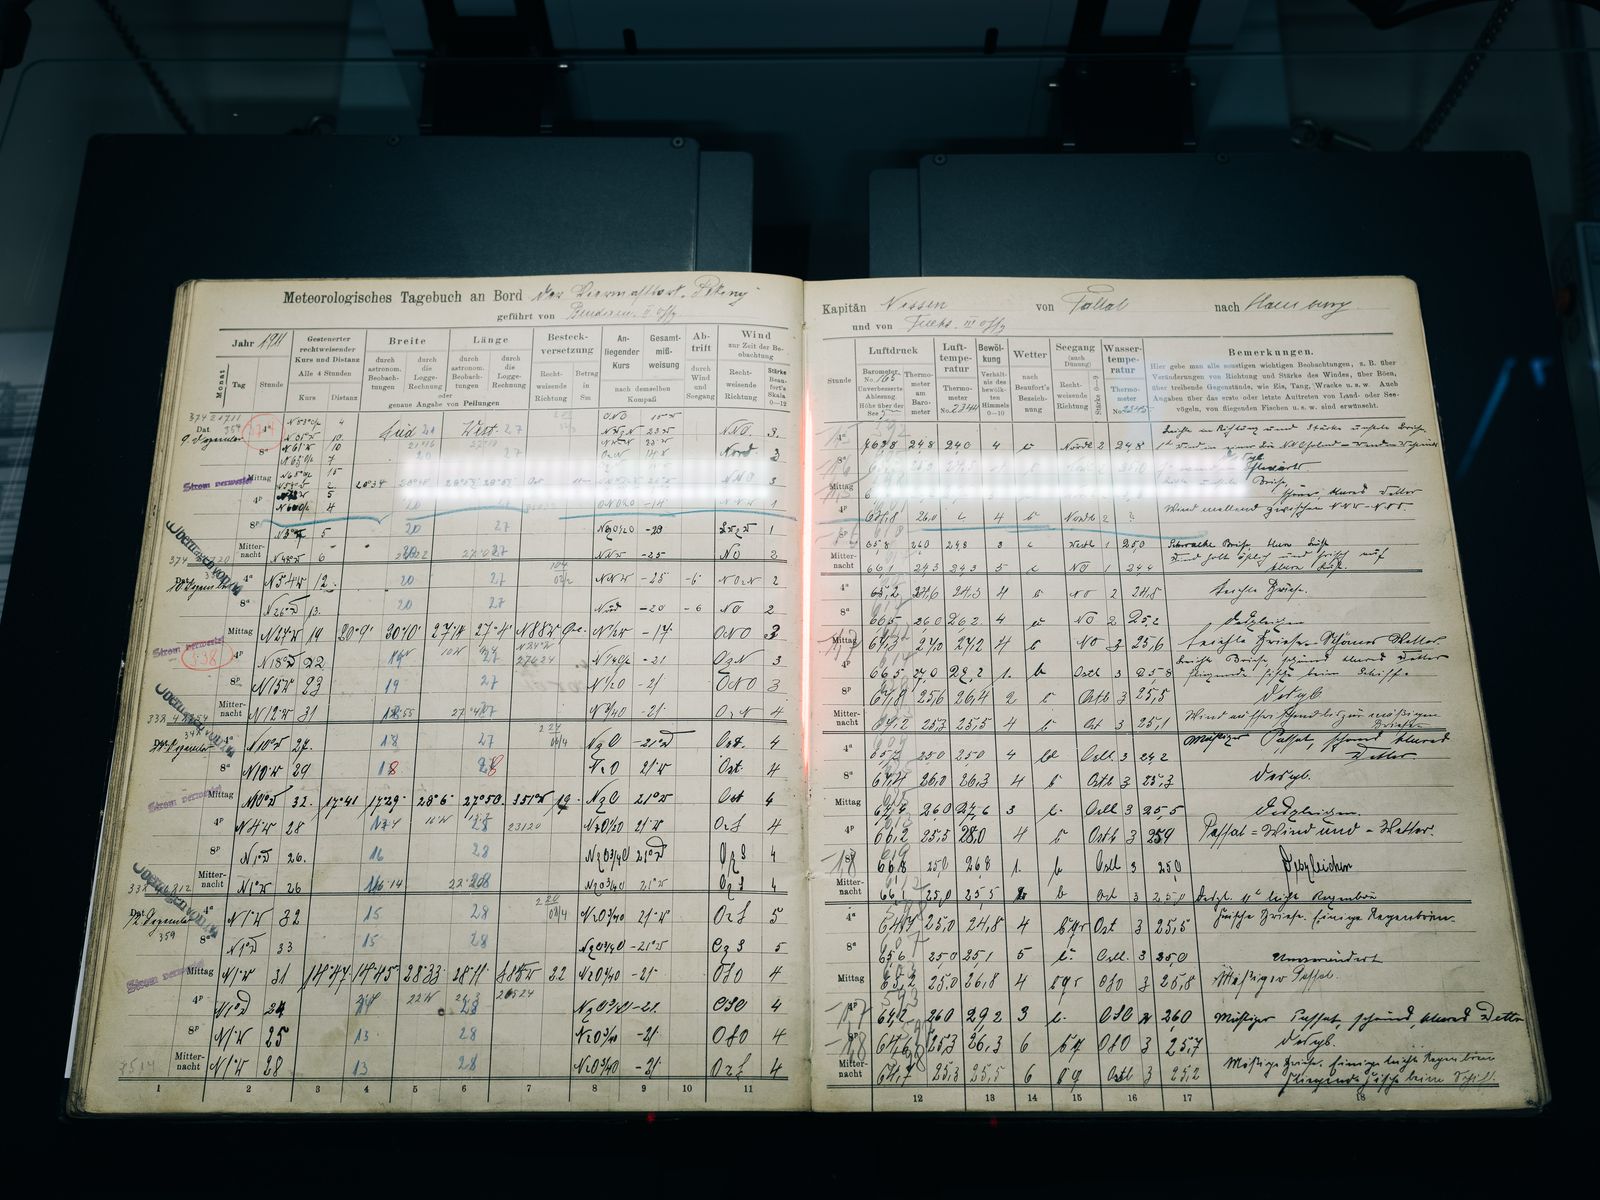 © Jan Richard Heinicke - A ship journal at the Federal Maritime and Hydrographic Agency in Hamburg.